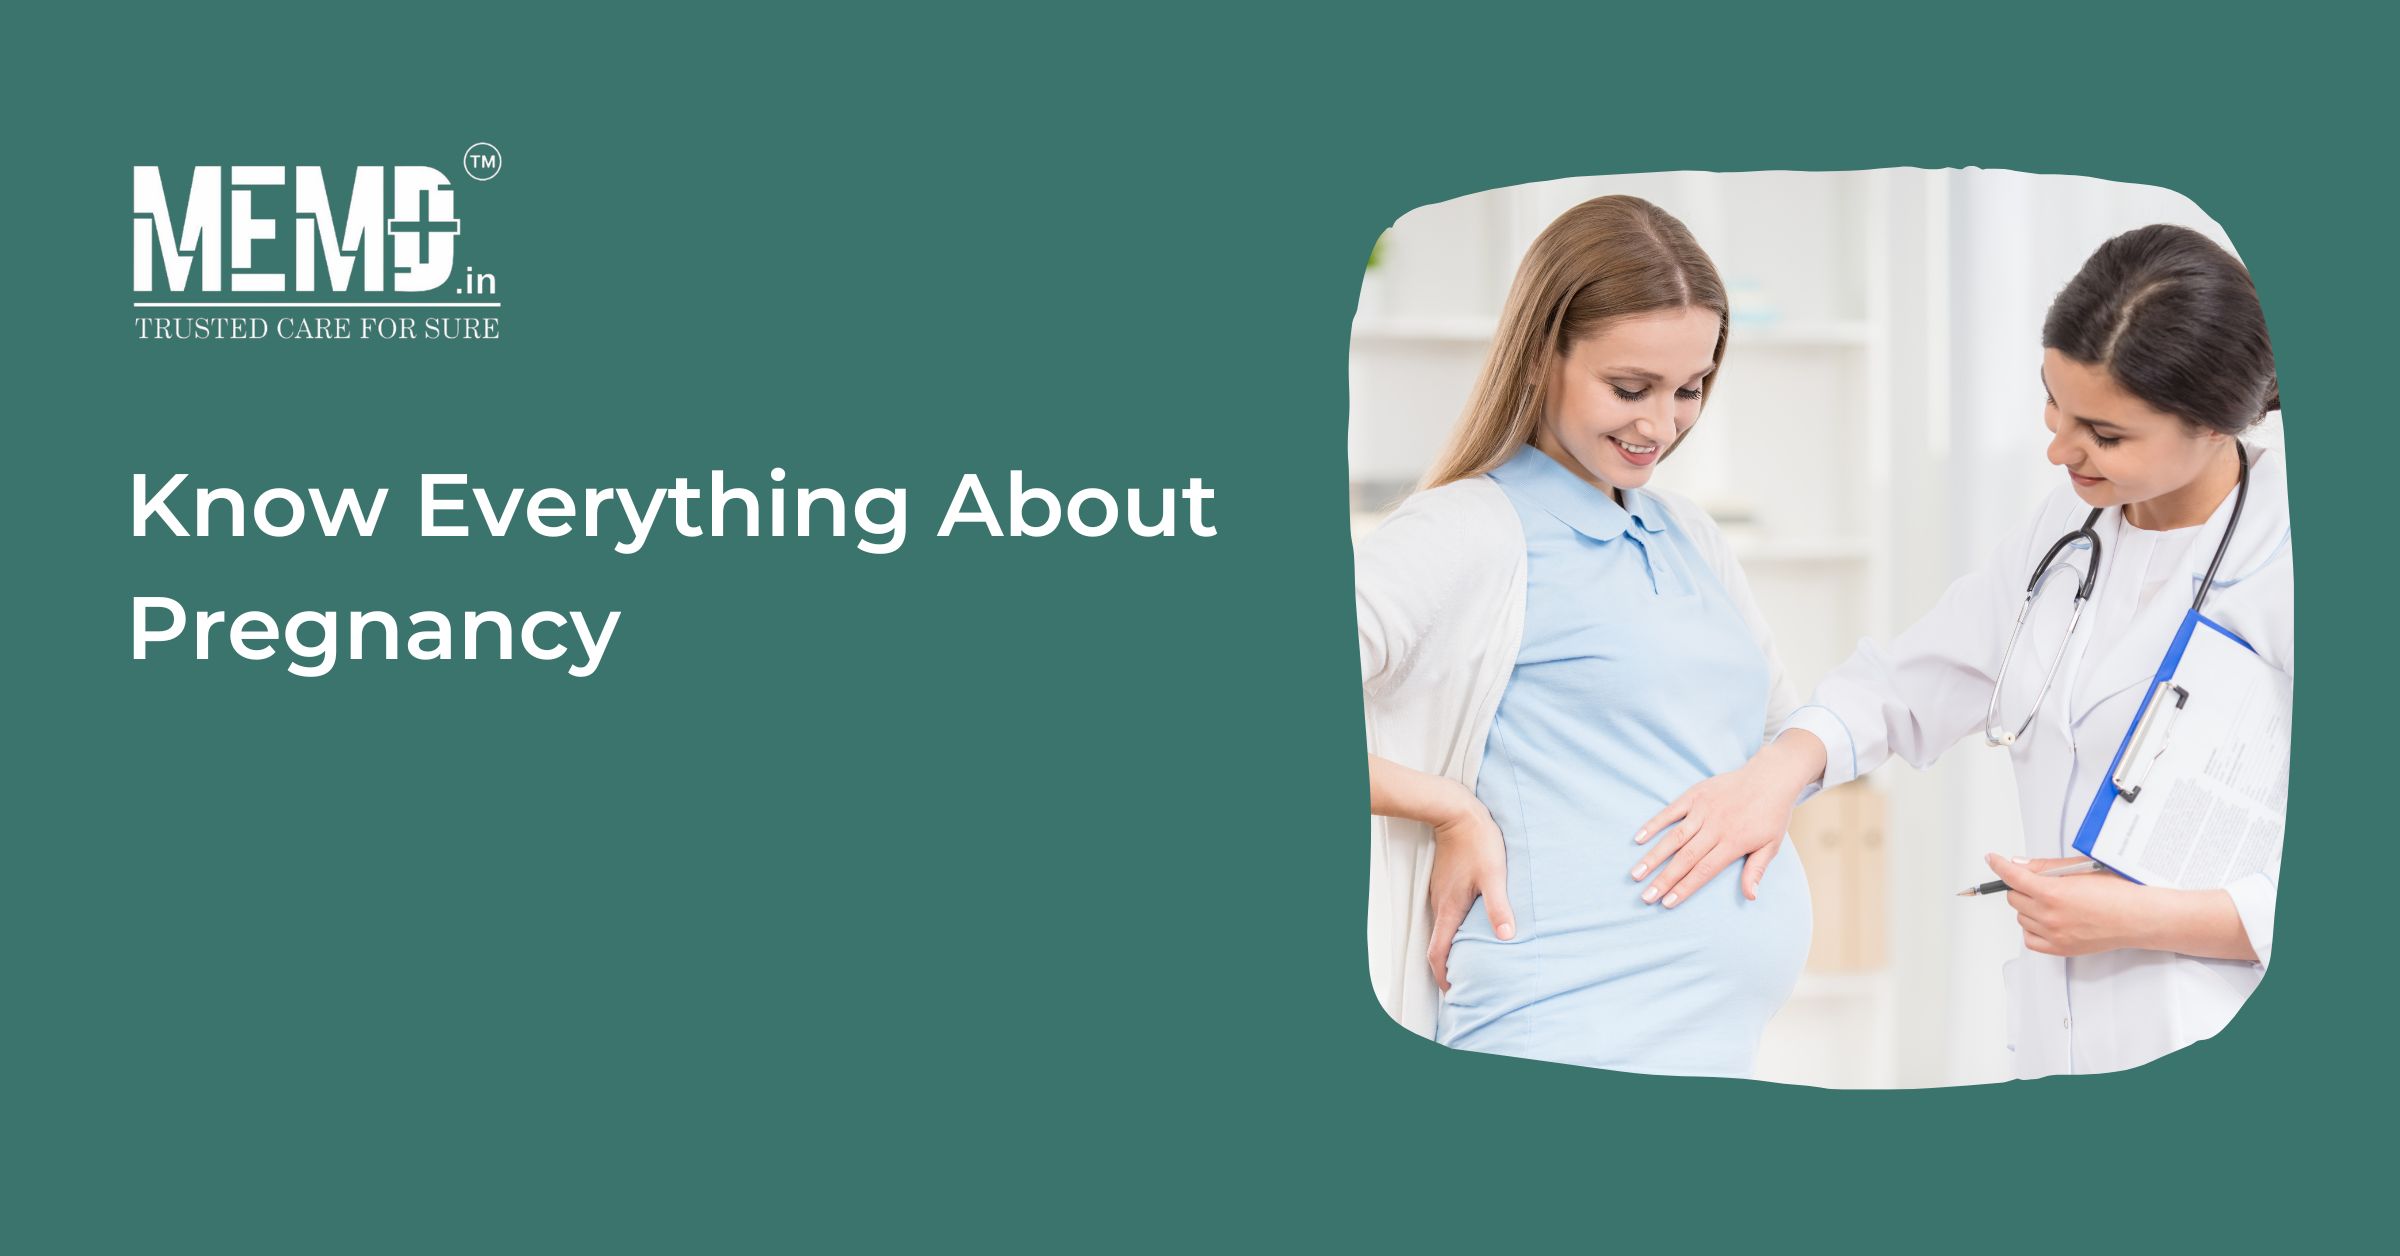 Know Everything About Pregnancy If you are reading this, you may be pregnant or planning to get pregnant and want to know everything about pregnancy. Despite the joyous days and dreams of holding a baby in your arms, pregnancy is not easy. It contains several complicated steps and has numerous symptoms. This article will deal with all your possible queries regarding pregnancy, including the procedure, definition, and symptoms. Usually, a woman gets pregnant when sperm fertilizes an egg. Millions of sperm come out every time a man ejaculates. But there is that one sperm that can fertilize the egg. This is the basic understanding of pregnancy. Now, let’s move on to more.  When Do You Get Pregnant?  Pregnancy happens when a sperm residing in semen comes in contact with the egg an ovary releases. The sperm then fertilizes the egg, and the fertilized egg gets implanted in the inner lining of the uterus. That is counted on the first day of your pregnancy, and your gestational age is counted from that day onwards. It can take 2-3 weeks to get pregnant since the intercourse.  What are the Early Symptoms of Pregnancy?  Although a missed period is considered the ultimate sign of pregnancy, other pregnancy symptoms can often be misunderstood as PMS. So, taking a home test as soon as you miss your period is wise. Here are some early signs of pregnancy-  1. Missed Period  As mentioned earlier, a missed period is one of the earliest and most prominent signs of pregnancy. As the fertilized eggs get attached to the inner lining of your uterus, the periods don’t occur until childbirth. However, a missed period can also signify underlying problems like hormonal imbalance or PCOD. Before assuming a pregnancy, as soon as you miss your period, talk to a gynaecologist to understand the reasons.  2. Weight Gain  Pregnancy may cause sudden weight gain due to hormonal changes. During the first trimester of your pregnancy, it is natural for you to gain about 1-4 lbs weight. However, a protruding tummy doesn’t appear until the beginning of your second trimester. It is the time when the weight gain becomes more prominent.  3. Heartburn   The inability to digest food properly and frequent heartburns is early signs of pregnancy. Sometimes a pregnancy causes the valve between your stomach and oesophagus to get relaxed, through which the acid leaks out. This causes heartburn to occur.  4. Constipation and Indigestion  Constipation is another common sign of pregnancy that many women experience. During pregnancy, you may face rapid hormonal changes that result in many pregnancy-related issues. Indigestion and Constipation are some of them. Some hormonal changes make your digestive system lag, because of which you cannot digest food properly, which further affects your bowel movement, causing Constipation.  5. Light Spotting  Although discovering light spotting after your missed periods is terrible, it is a very common sign that says you are pregnant. Although the reason for spotting can be multiple, that doesn’t rule out the chances of you being pregnant. Light bleeding or spotting can result from the fertilized egg’s implantation inside your uterus.  It would be best if you did not ignore these spotting as they can be an implication of many major problems like inflammation or a possible infection. Bleeding can also signify many threatening conditions like a miscarriage, an ectopic pregnancy, or placenta previa. Never be late; go for an online gynaecologist consultation if you see such spotting.  6. Changes in Your Breasts  Changes in the breasts are common and the most prominent early signs of pregnancy. Your breasts might feel tender, or you can find your breasts swollen and sensitive to the touch. It can give you a sense of heaviness and enlarged nipples that are more sensitive than ever. Pregnancy can also make the areolae get darker in colour.  7. Breakouts  Acne is another confusing pregnancy symptom that can also point to a PMS. When you are pregnant, your body produces more androgen hormones which result in severe acne. These hormones are responsible for oily skin, leading to clogged pores. When the pores in your facial skin are clogged, there are more chances for your skin to break out.  8. Feeling Nauseous   Feeling pukish is a common thing in pregnancy. Women often complain of ‘morning sickness’ or nausea during the first trimester of their pregnancy and for some even longer. This can result from indigestion or when the stomach gets shifted because of an enlarged uterus. Hormonal changes are also responsible for vomiting or feeling sick.  Conclusion  If you feel you are having one or more of these symptoms or there are chances of you being pregnant, it is best to go for a pregnancy test at home. These tests are known to have 99% accuracy. Thus, talking to a gynaecologist can clear all your doubts related to pregnancy.